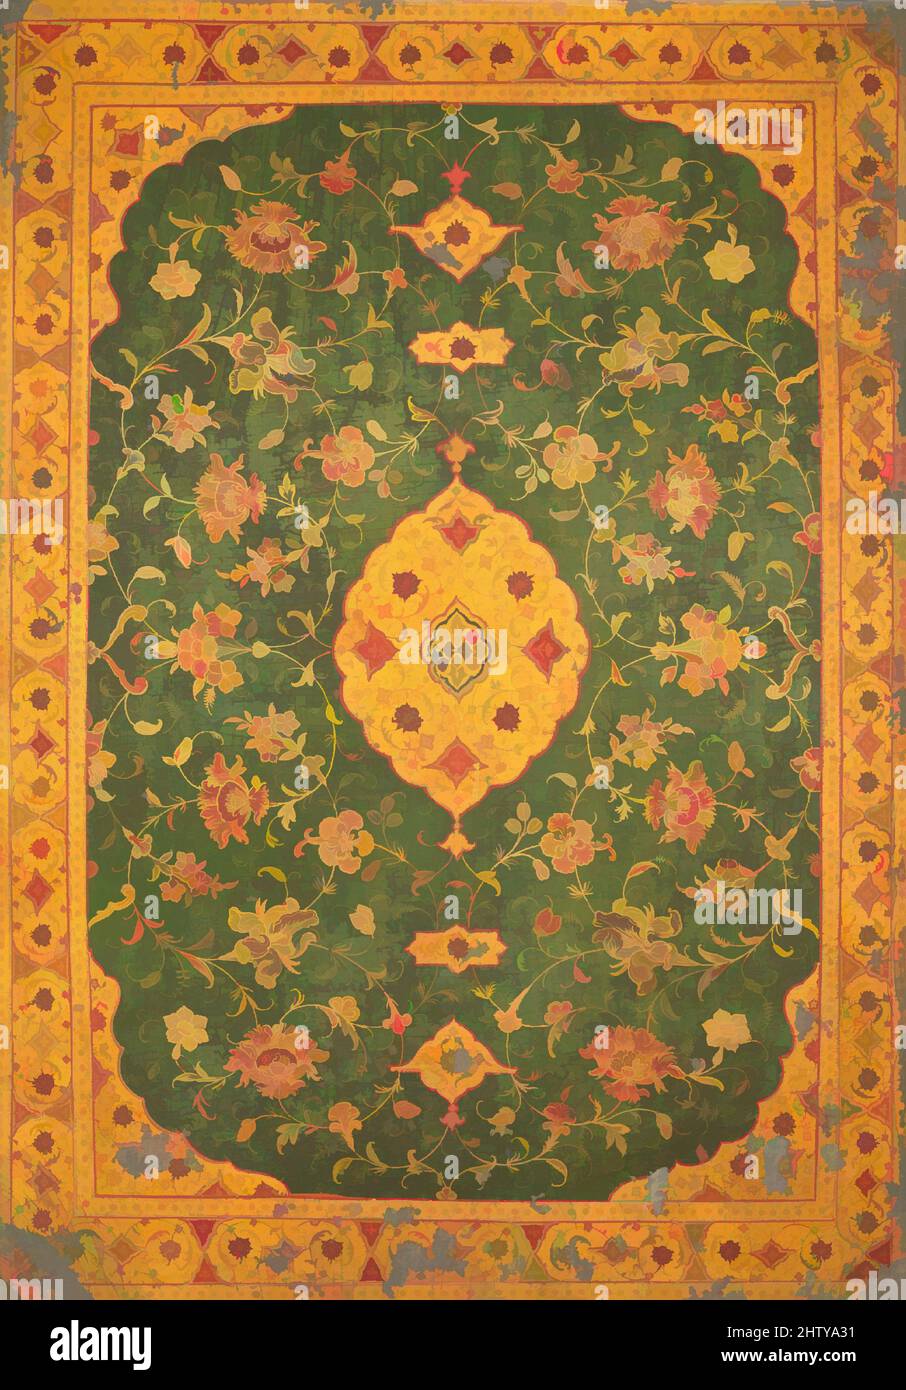 Art inspired by Bookbinding, 17th century, Attributed to India, Leather on laminated paper board, H. 15 7/8 in. (40.3 cm), Codices, Classic works modernized by Artotop with a splash of modernity. Shapes, color and value, eye-catching visual impact on art. Emotions through freedom of artworks in a contemporary way. A timeless message pursuing a wildly creative new direction. Artists turning to the digital medium and creating the Artotop NFT Stock Photo